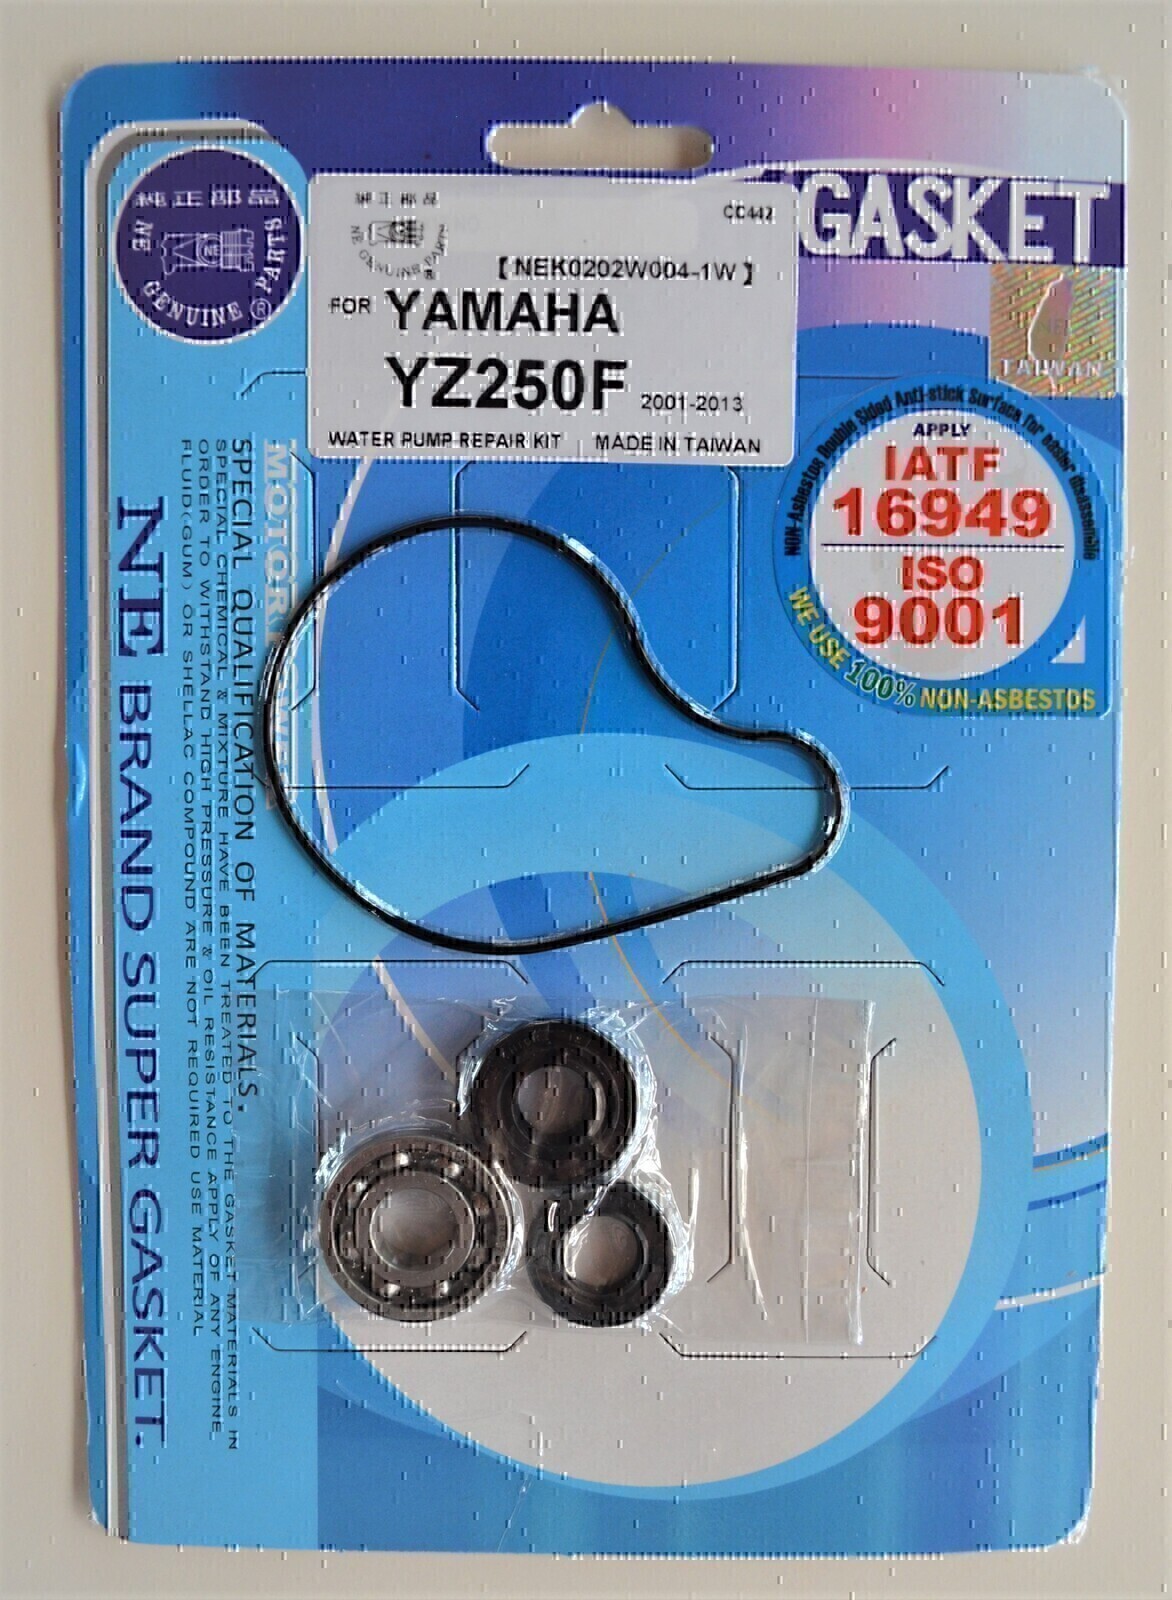 WATER PUMP REPAIR KIT FOR YAMAHA YZ250F YZ 250F WR250F WR 250F 2001 - 2013